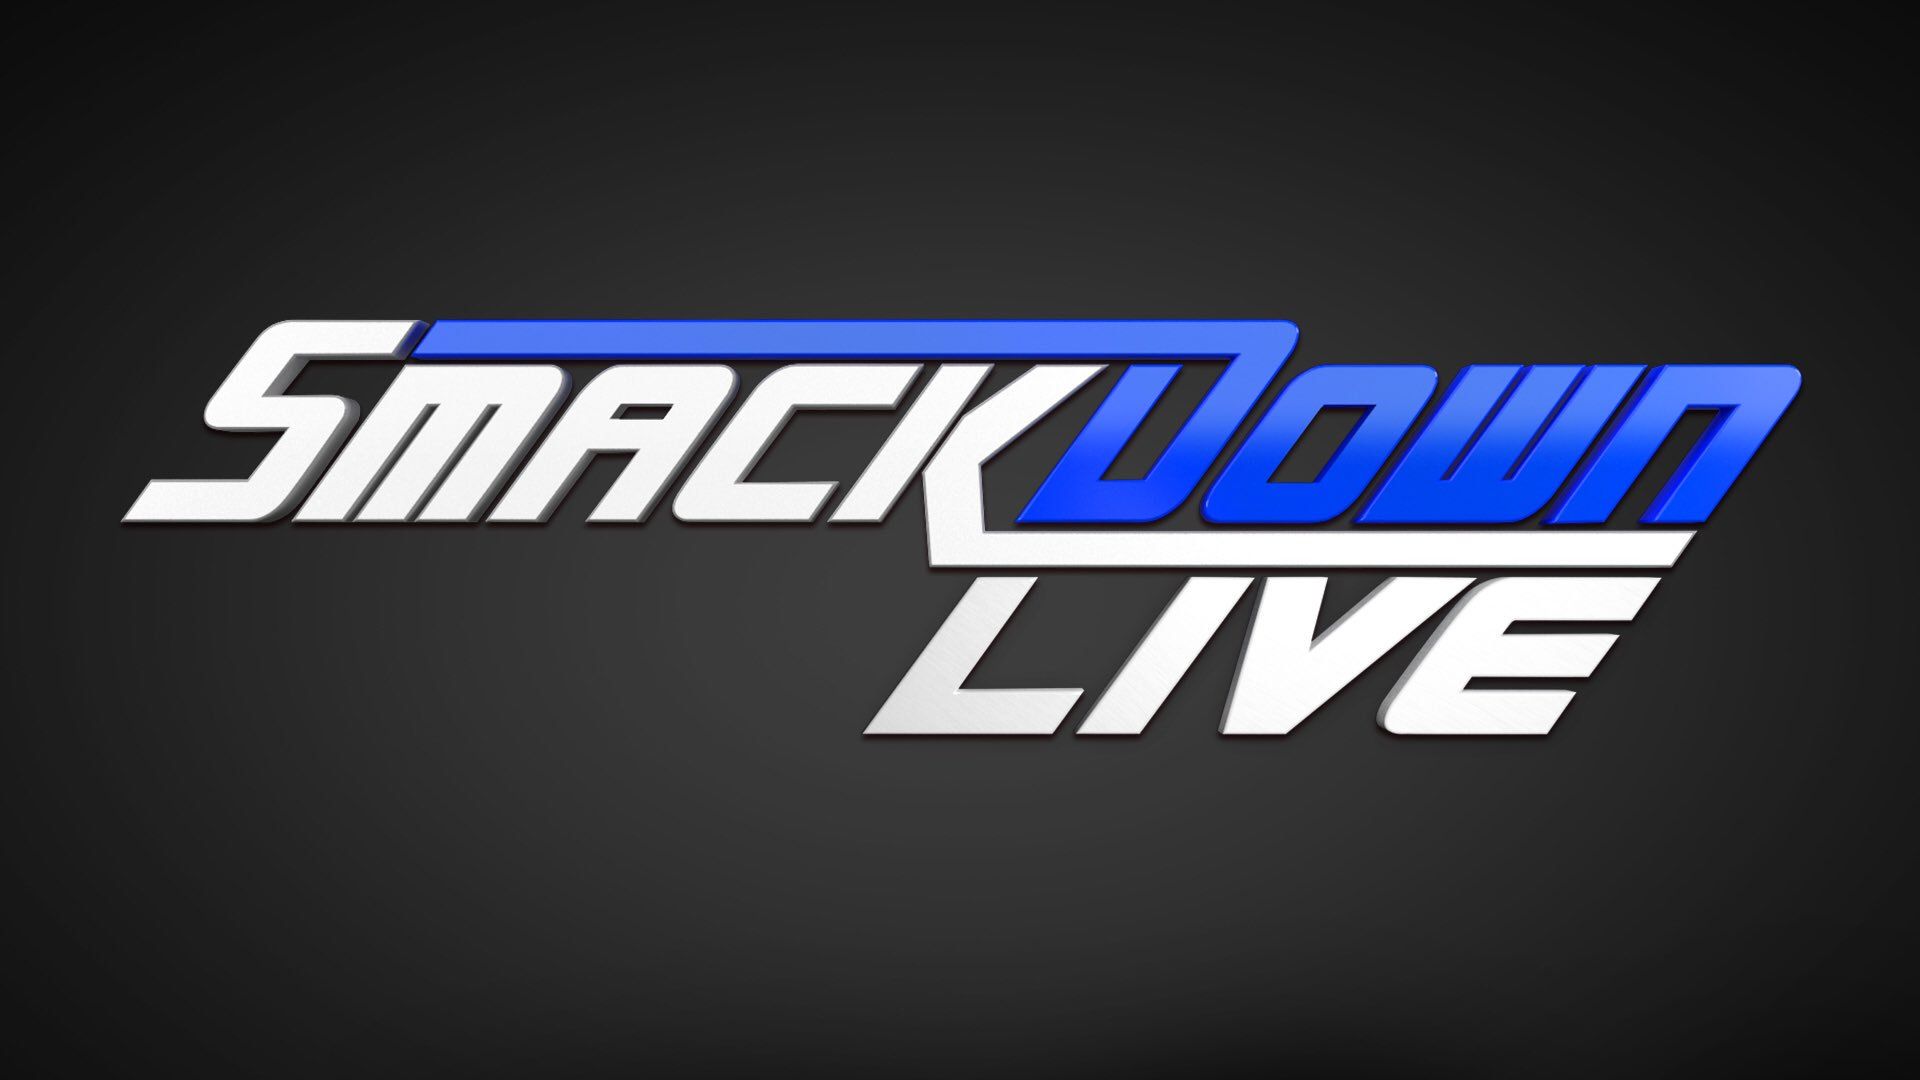 WWE SmackDown Preview: New WWE Title Challenger, New Stars And More.com. Wwe logo, Wwe raw and smackdown, Watch wrestling